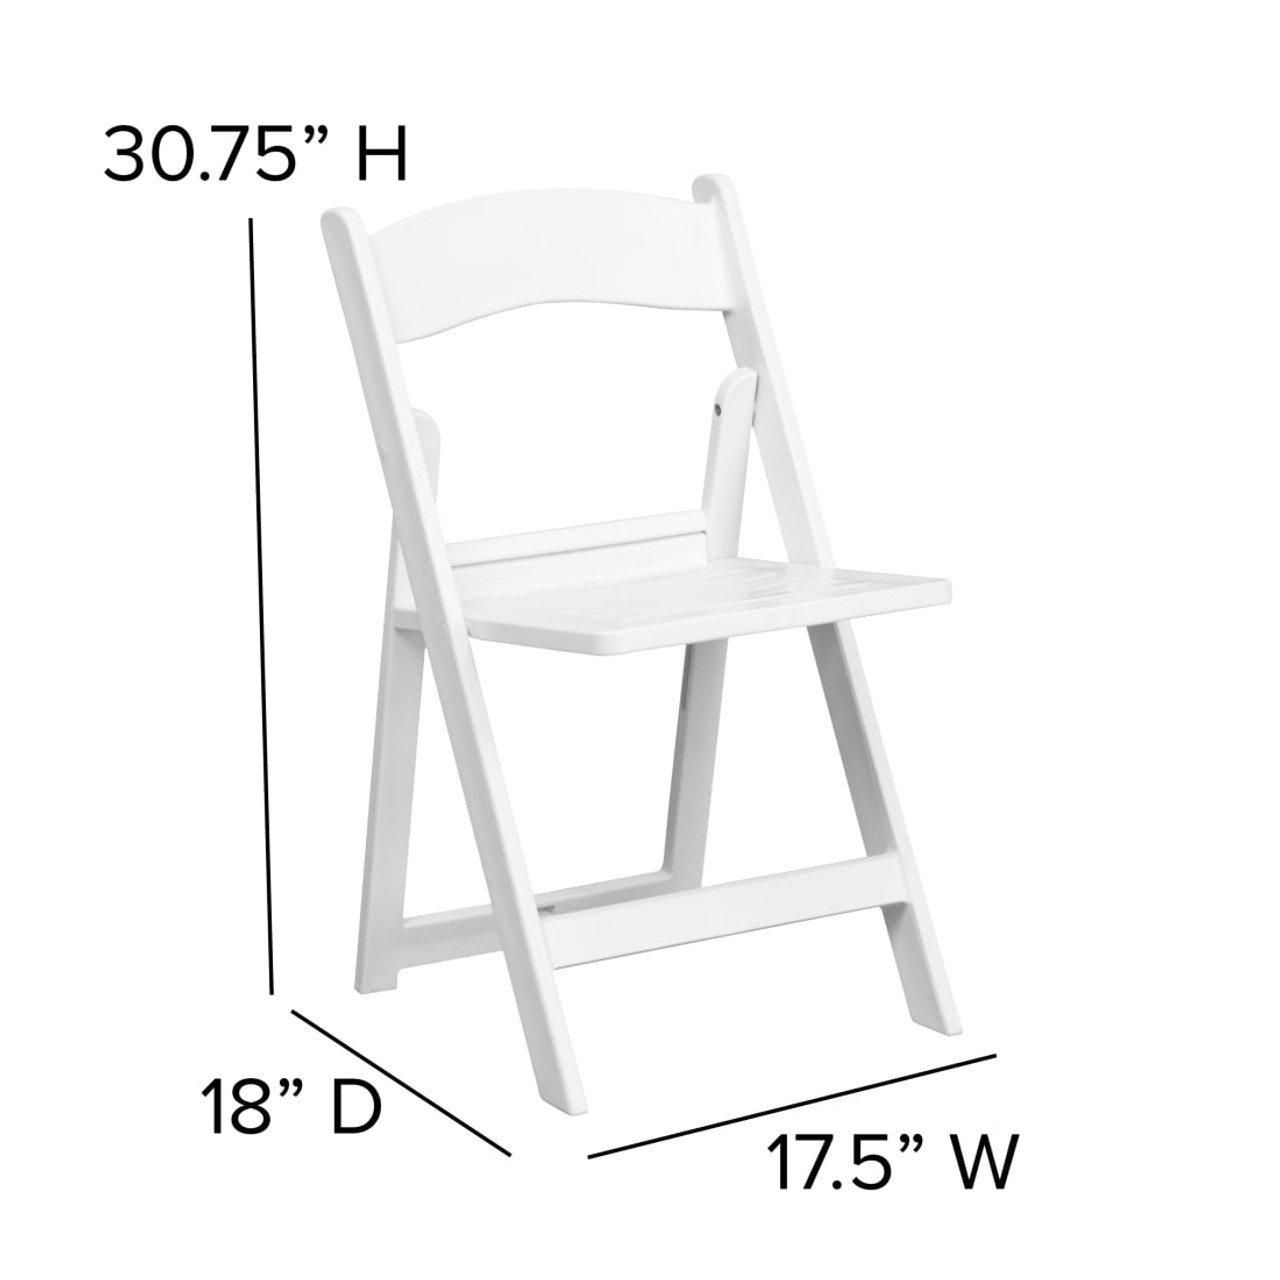 HERCULES Capacity White Resin Folding Chair with Slatted Seat